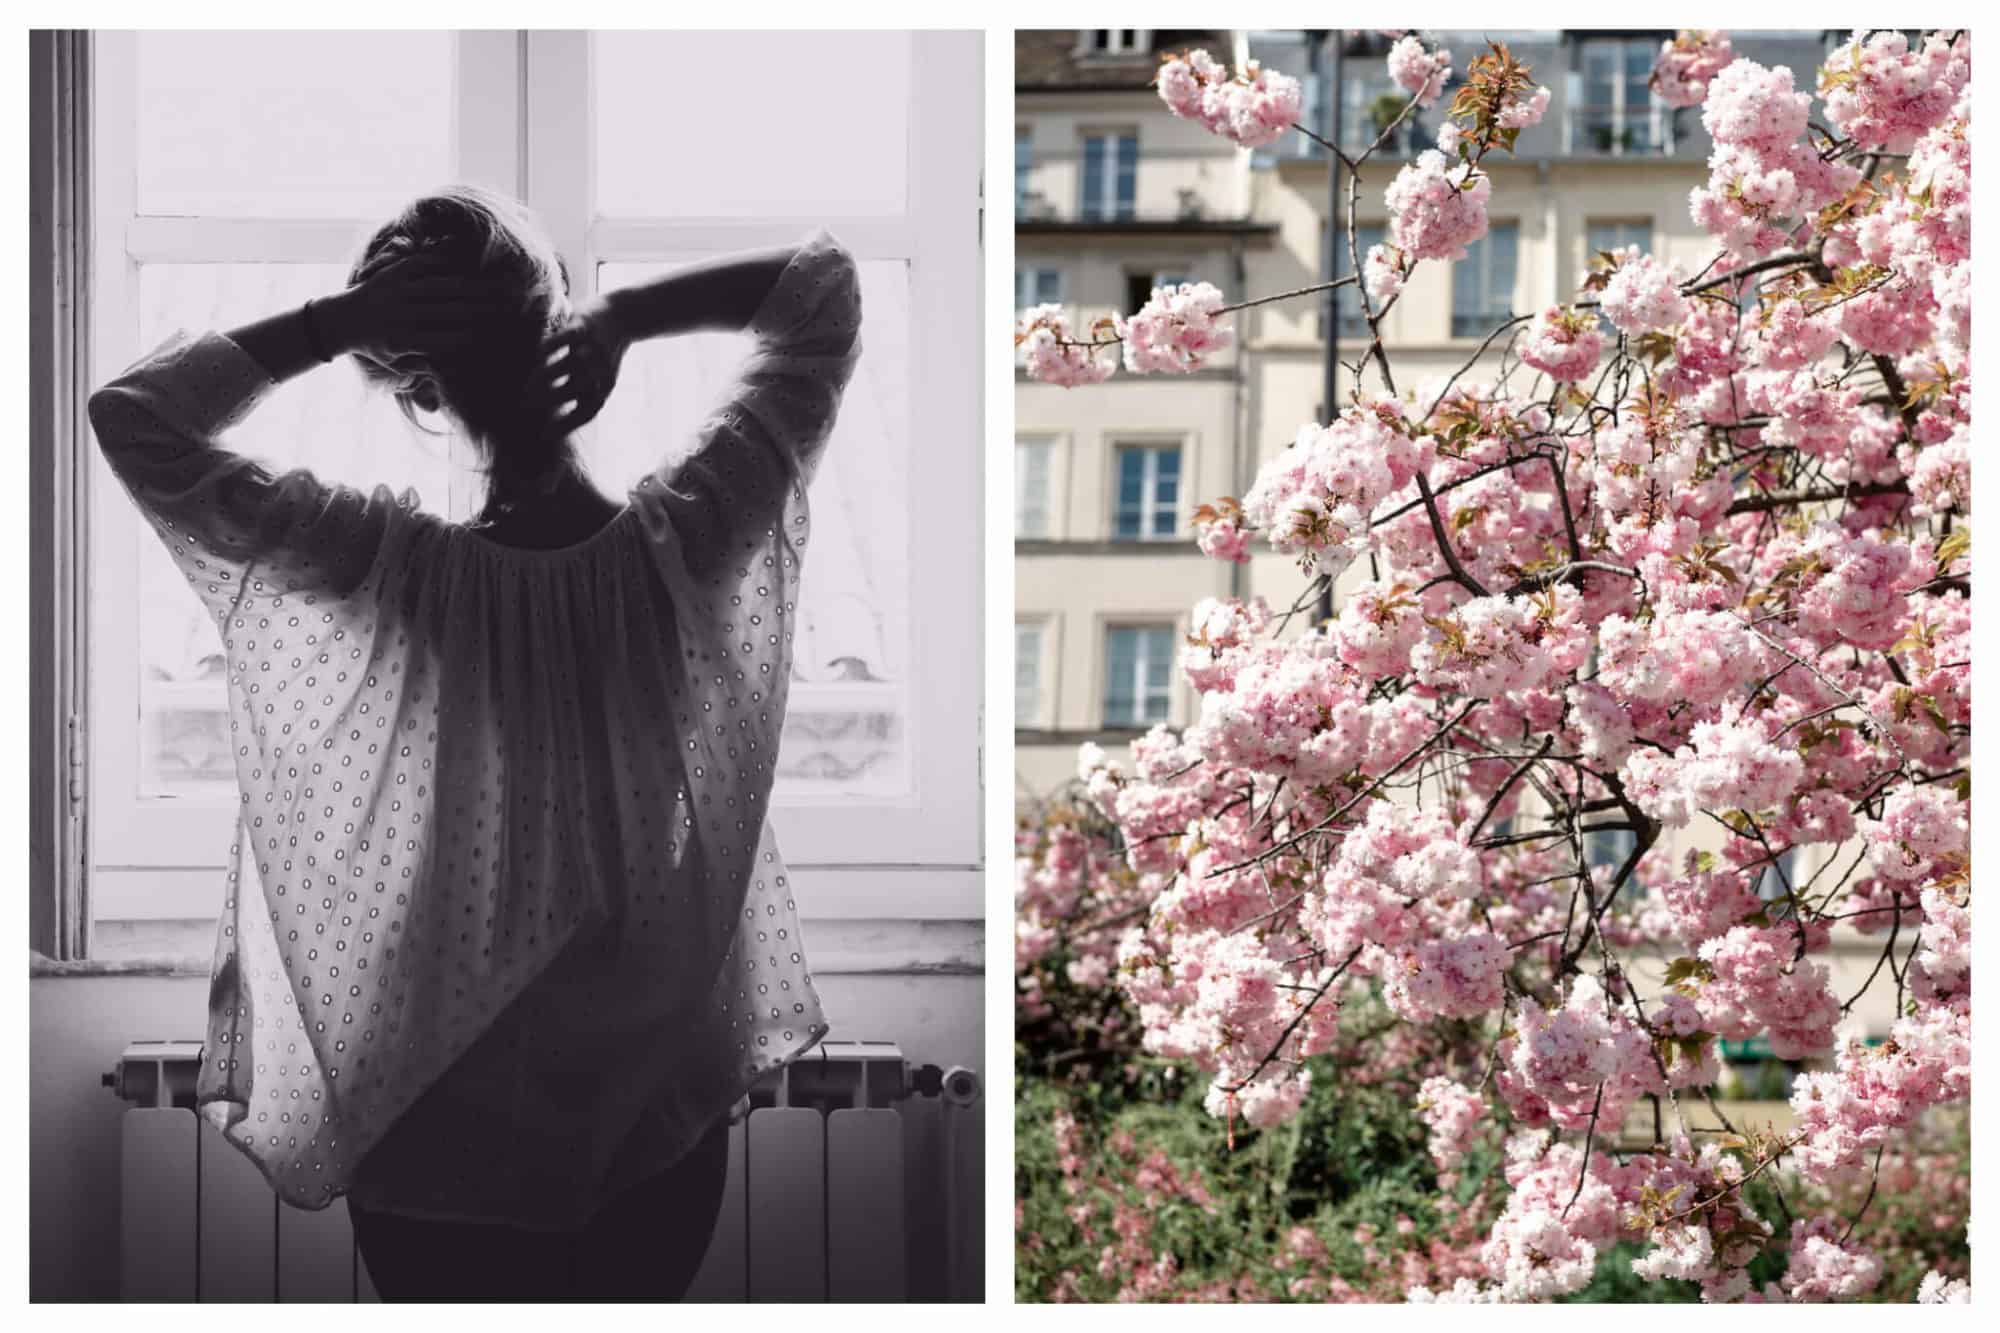 Left, woman seen from the back as stays home during the Covid-19 pandemic. Right, cherry tree blossoms in Paris spring at the moment.